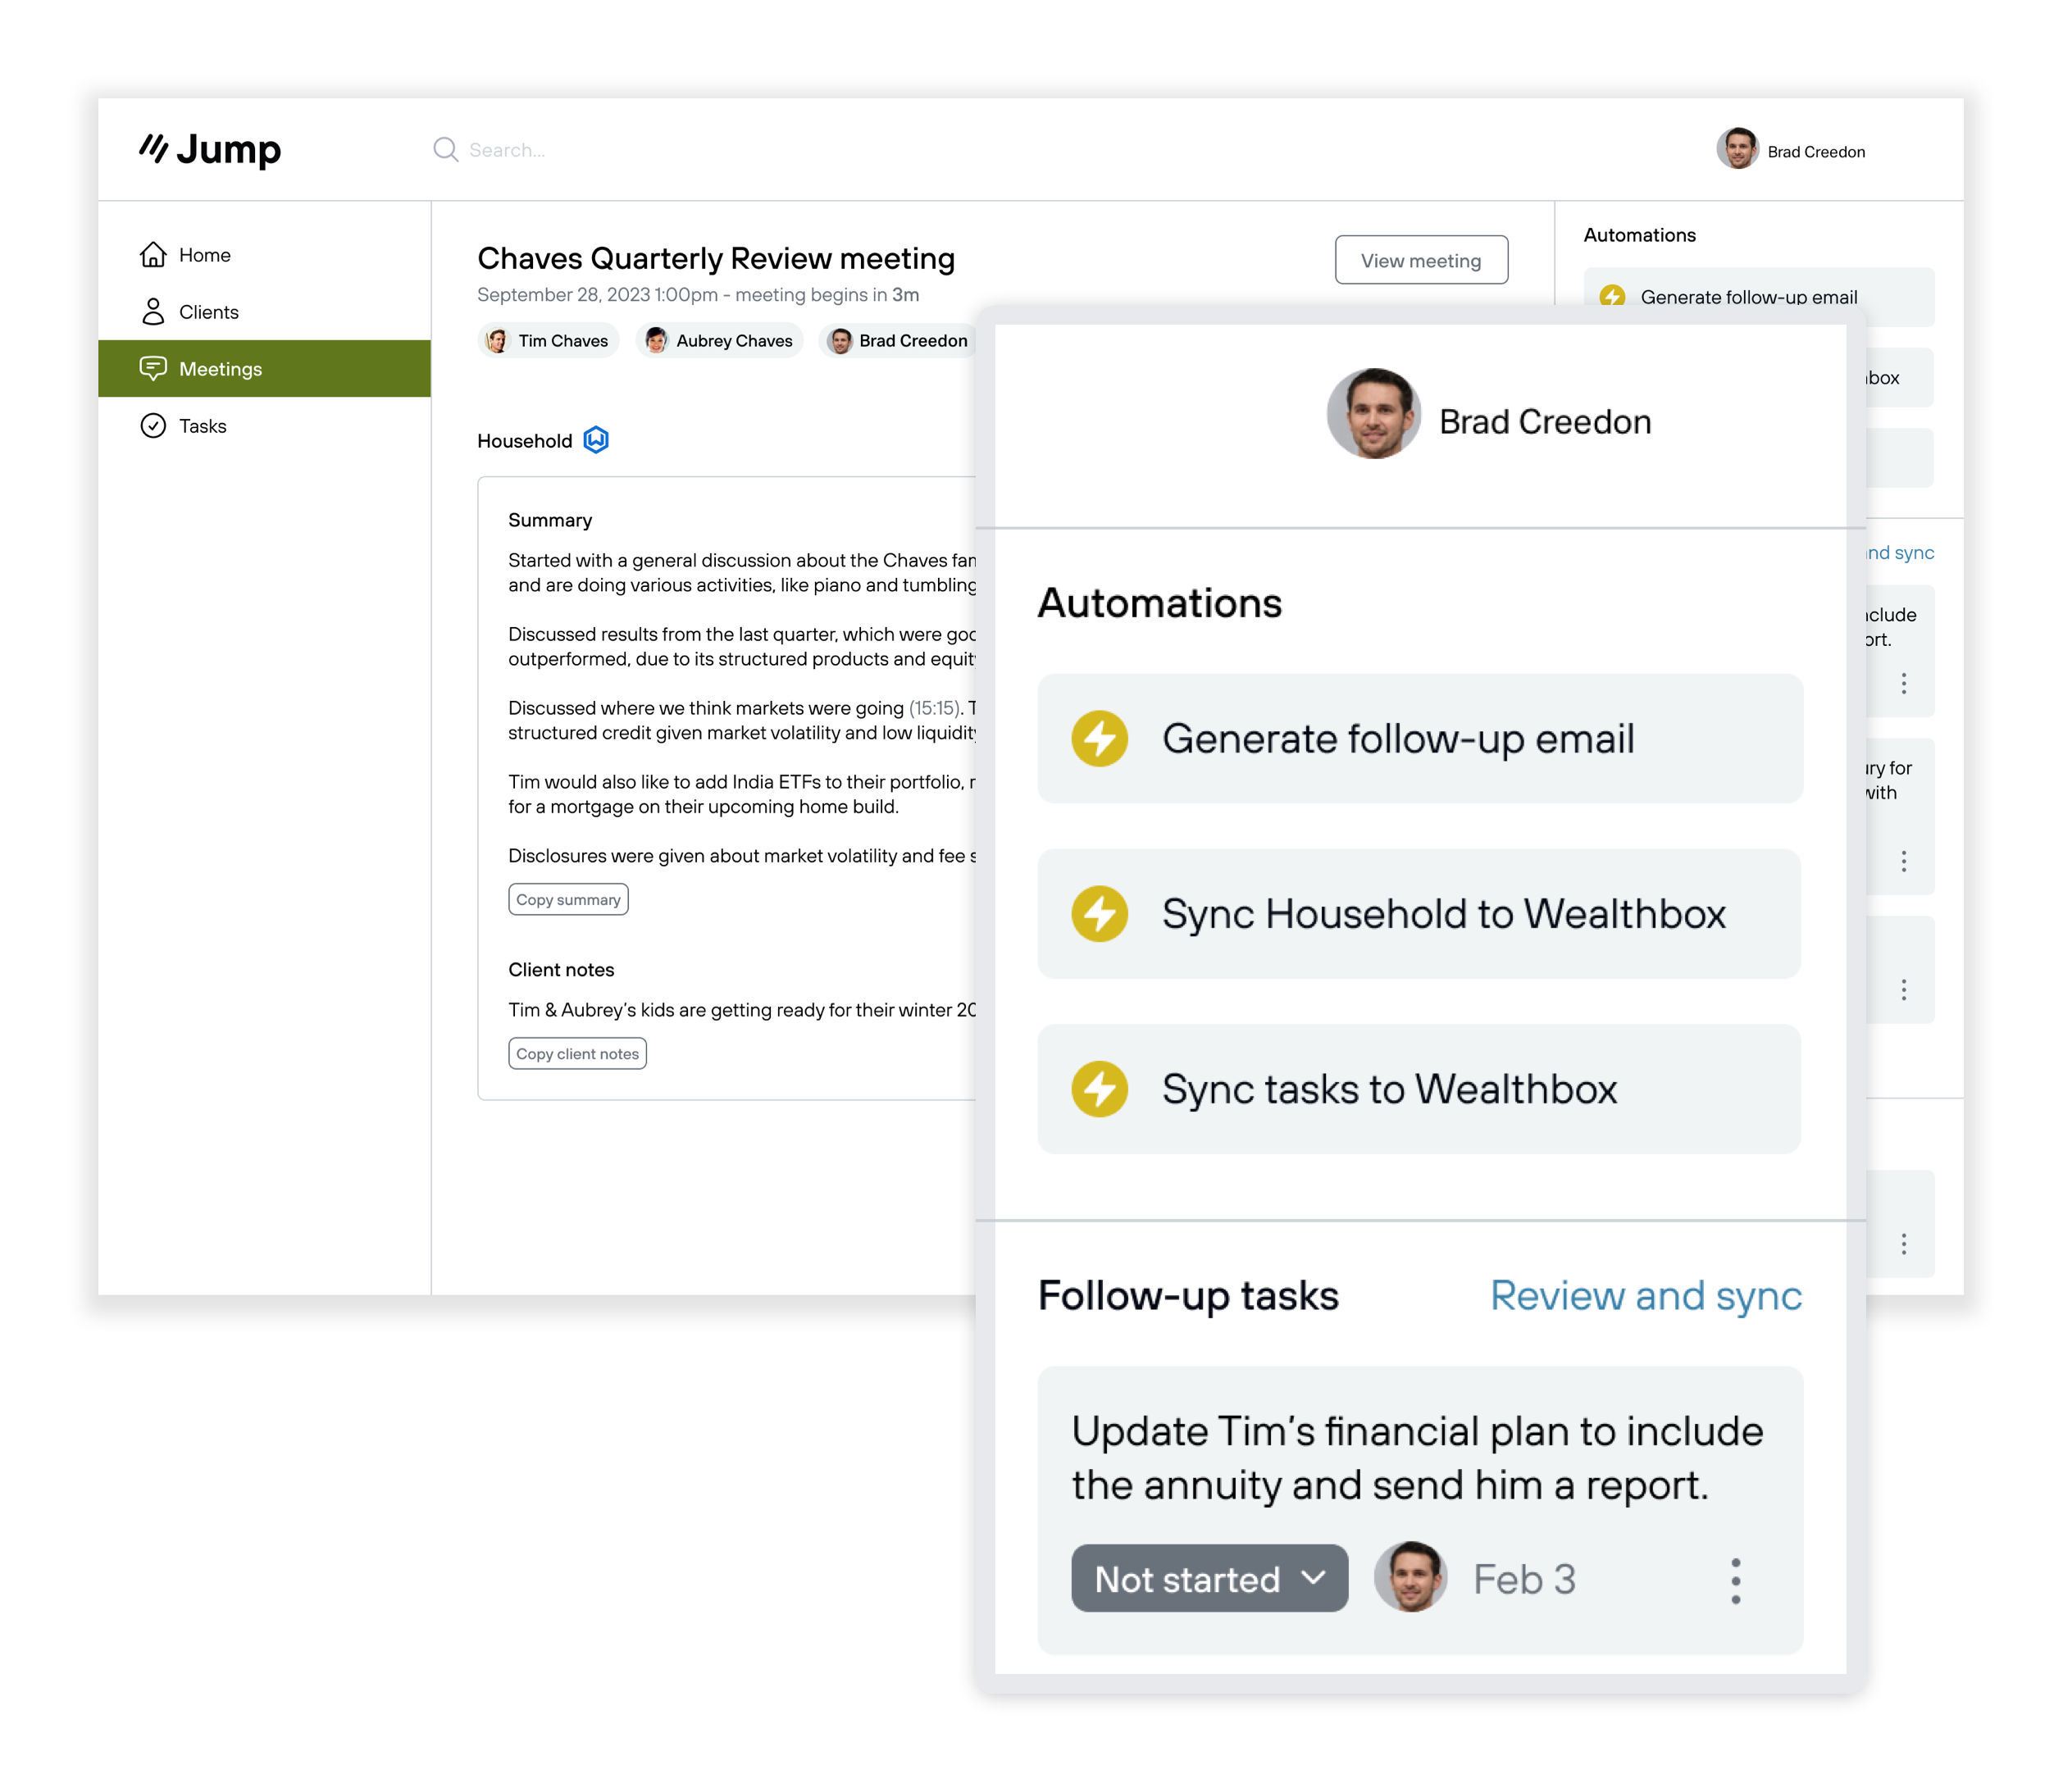 Jump uses AI to create notes and tasks from in-person or remote meetings, and preps them for approval and sync into Wealthbox. Advisors can set up automations to send notes and tasks directly into Wealthbox in different formats for different advisors or meeting types.